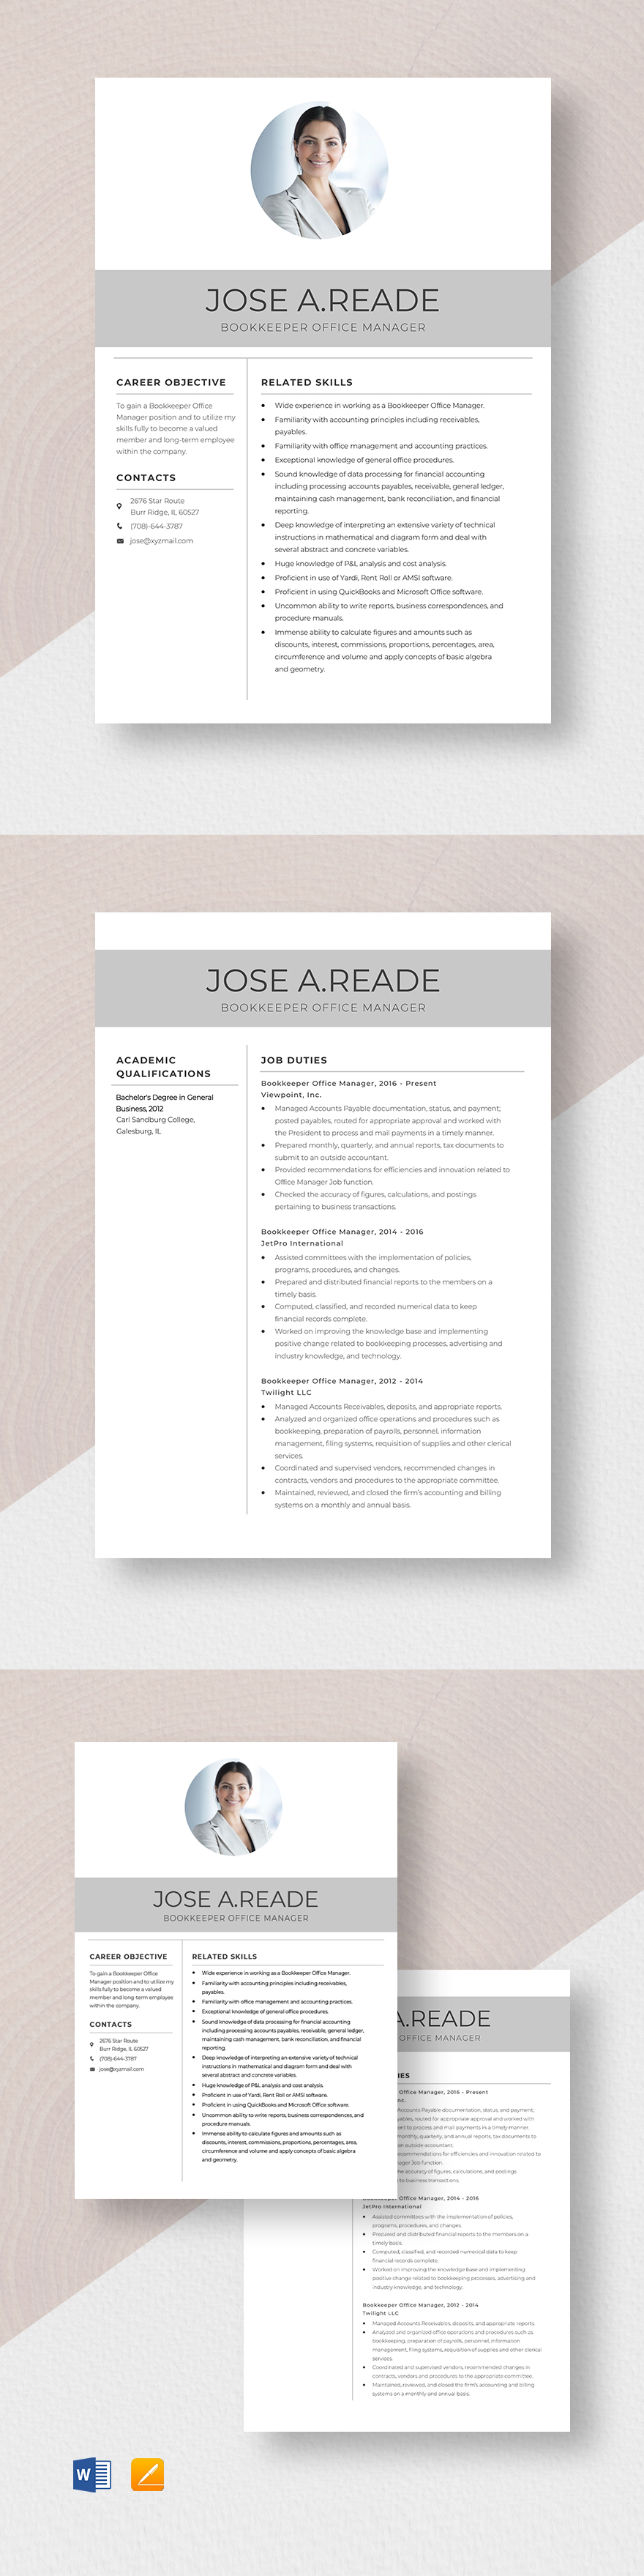 free-bookkeeper-office-manager-resume-template-word-apple-pages